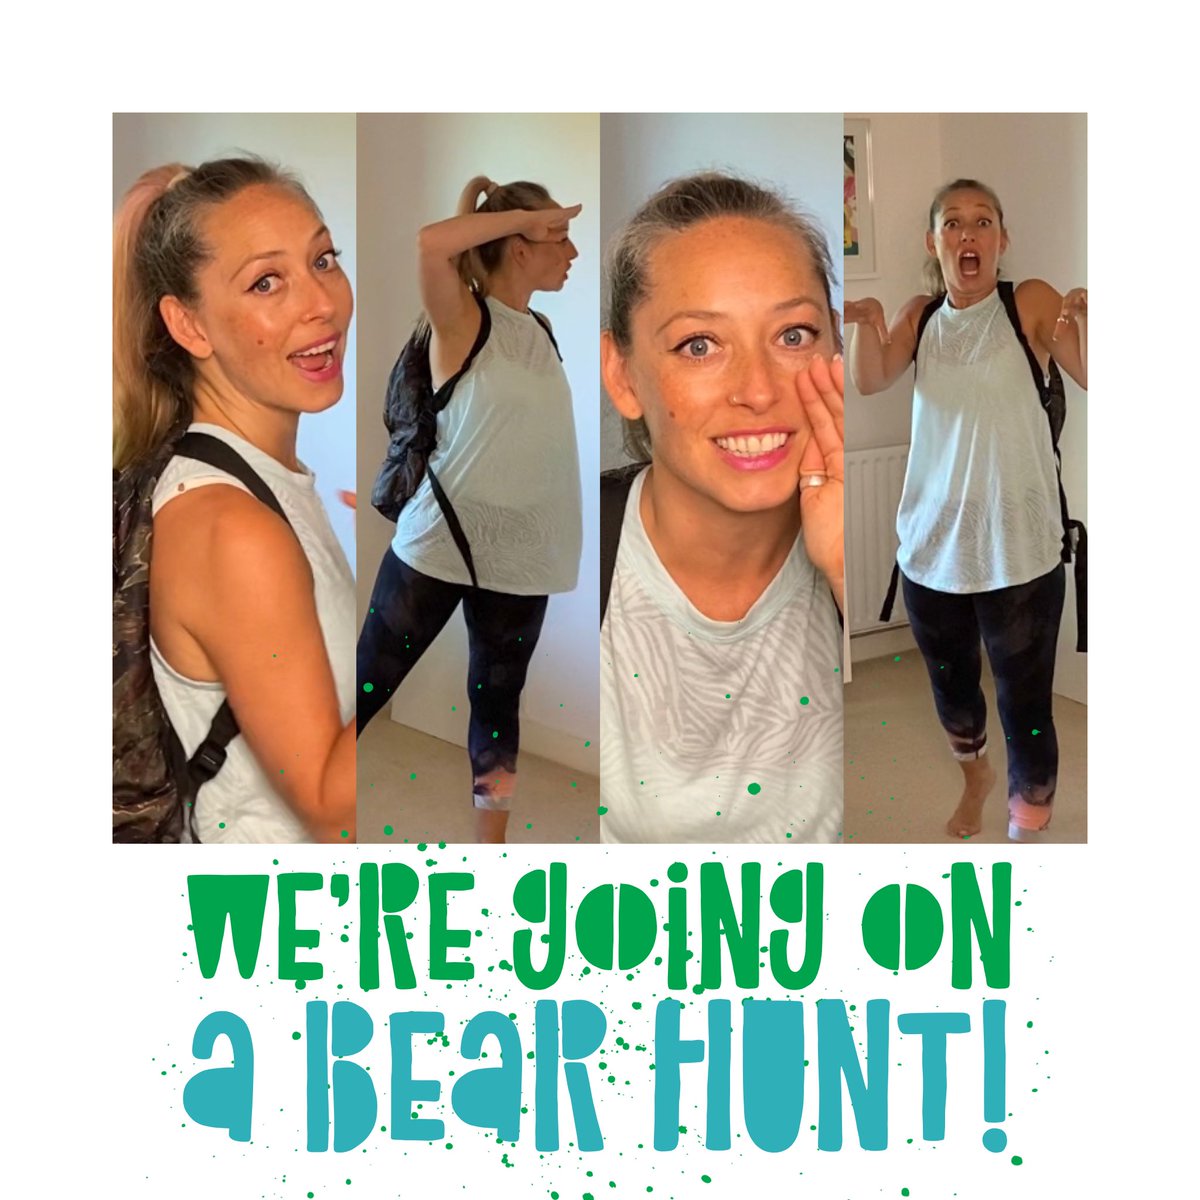 A new video is on it’s way for the younger dancers out there. Pack your bag and keep your eyes peeled, as WE’RE GOING ON A BEAR HUNT!
🐻 🐾 #weregoingonabearhunt #dance #earlyyearsdance #onlinedance